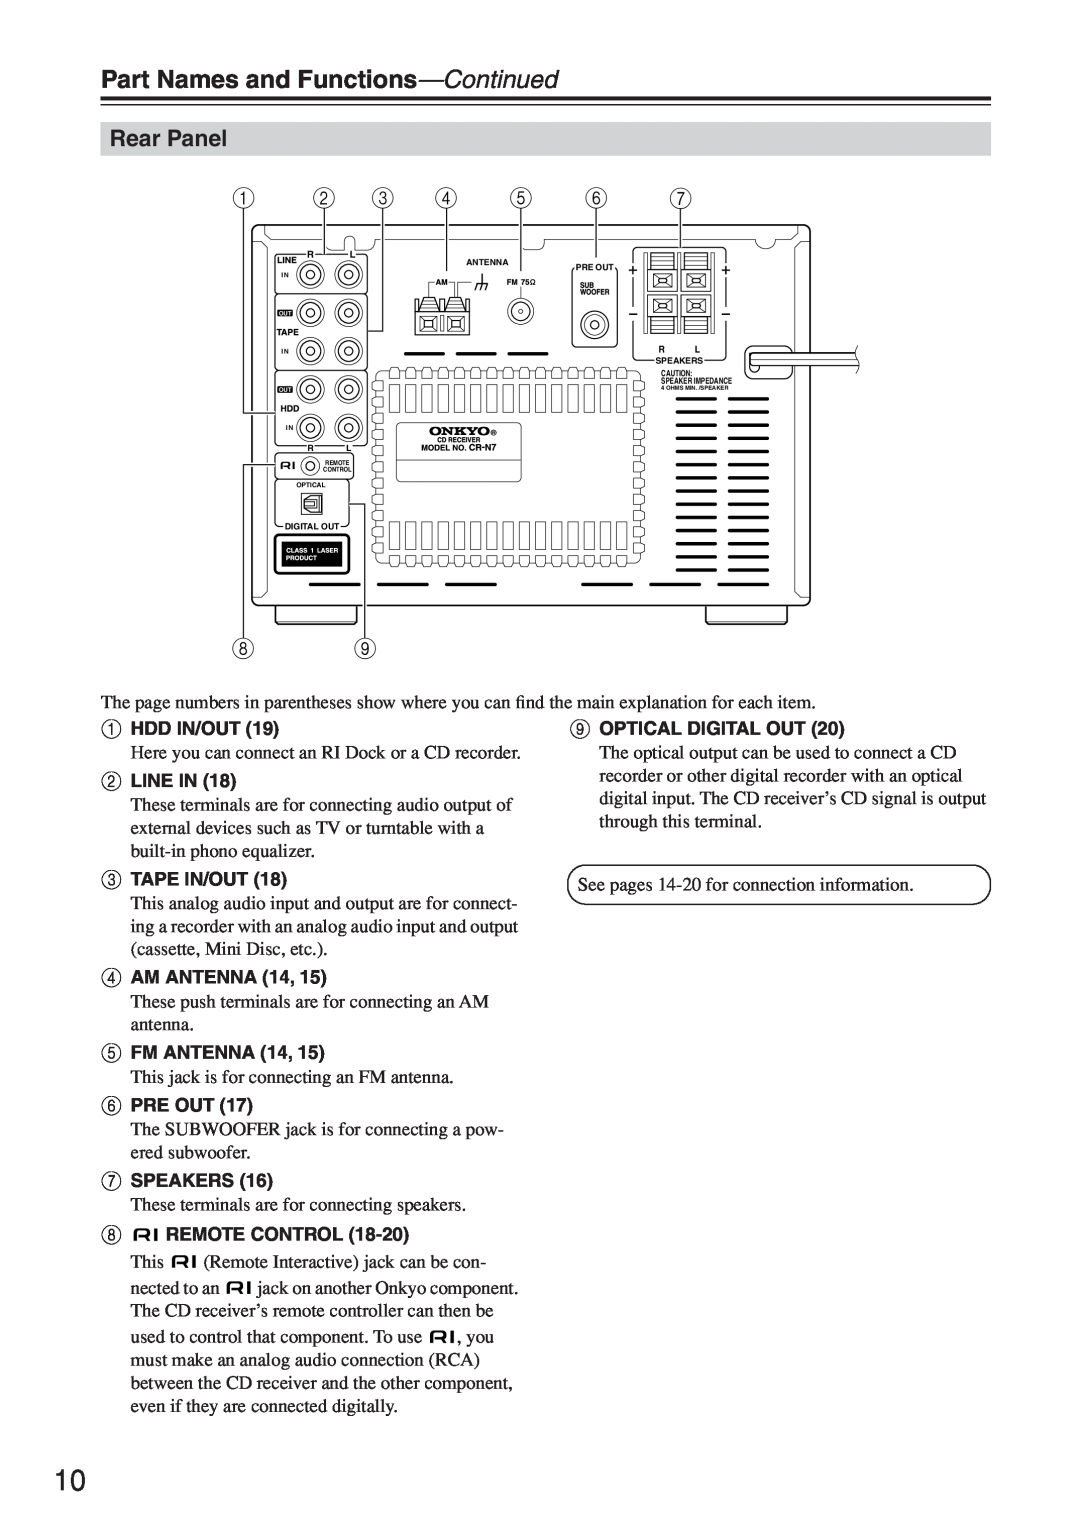 Onkyo CR-N7 instruction manual Rear Panel, B C D, Part Names and Functions-Continued 